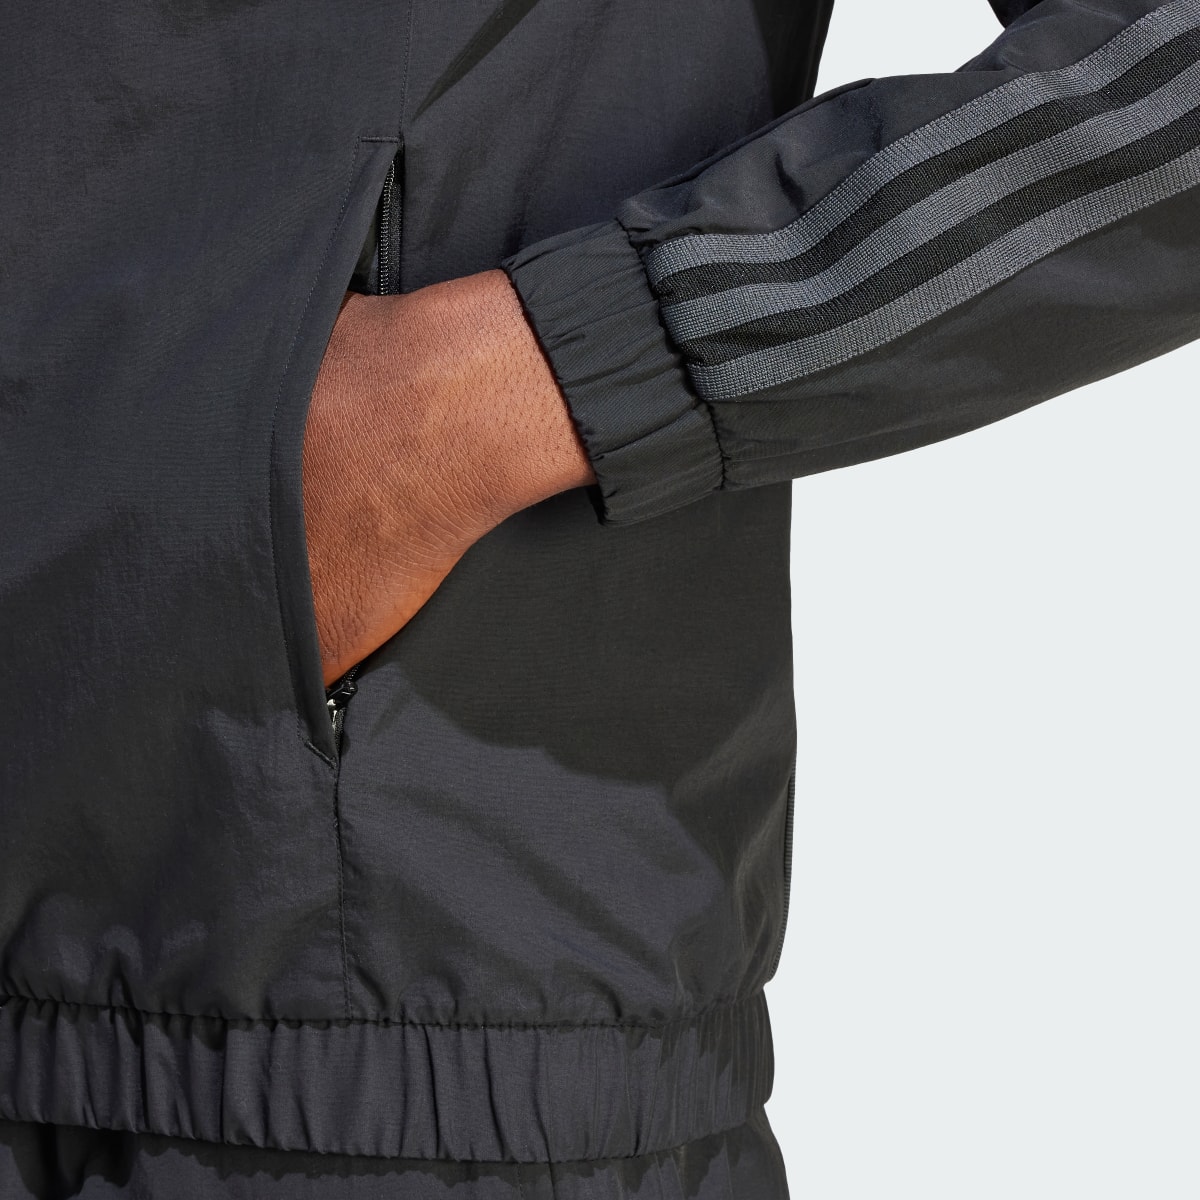 Adidas All Blacks Rugby Track Suit Track Top. 8